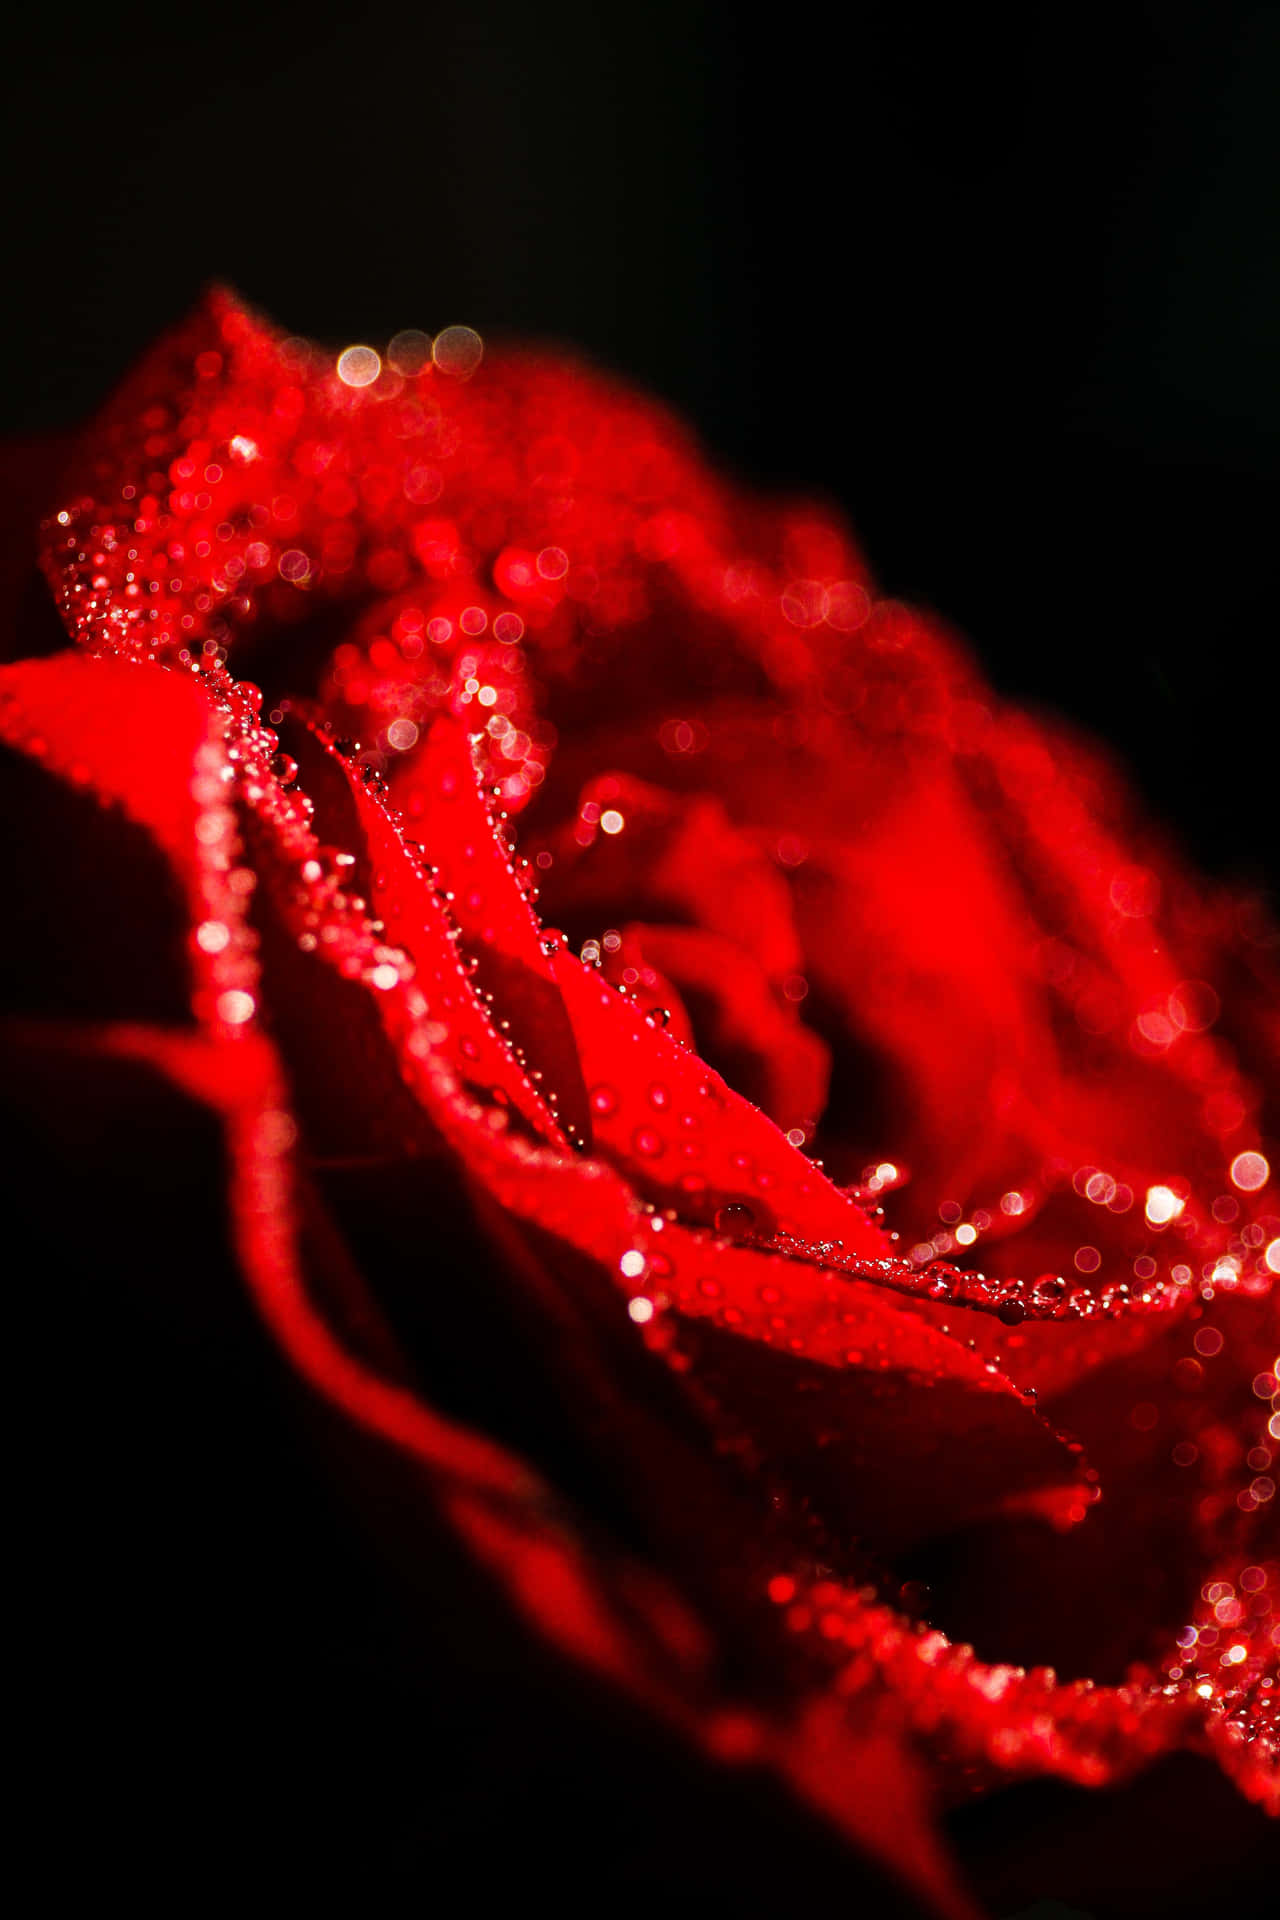 A Red Rose With Water Droplets On It